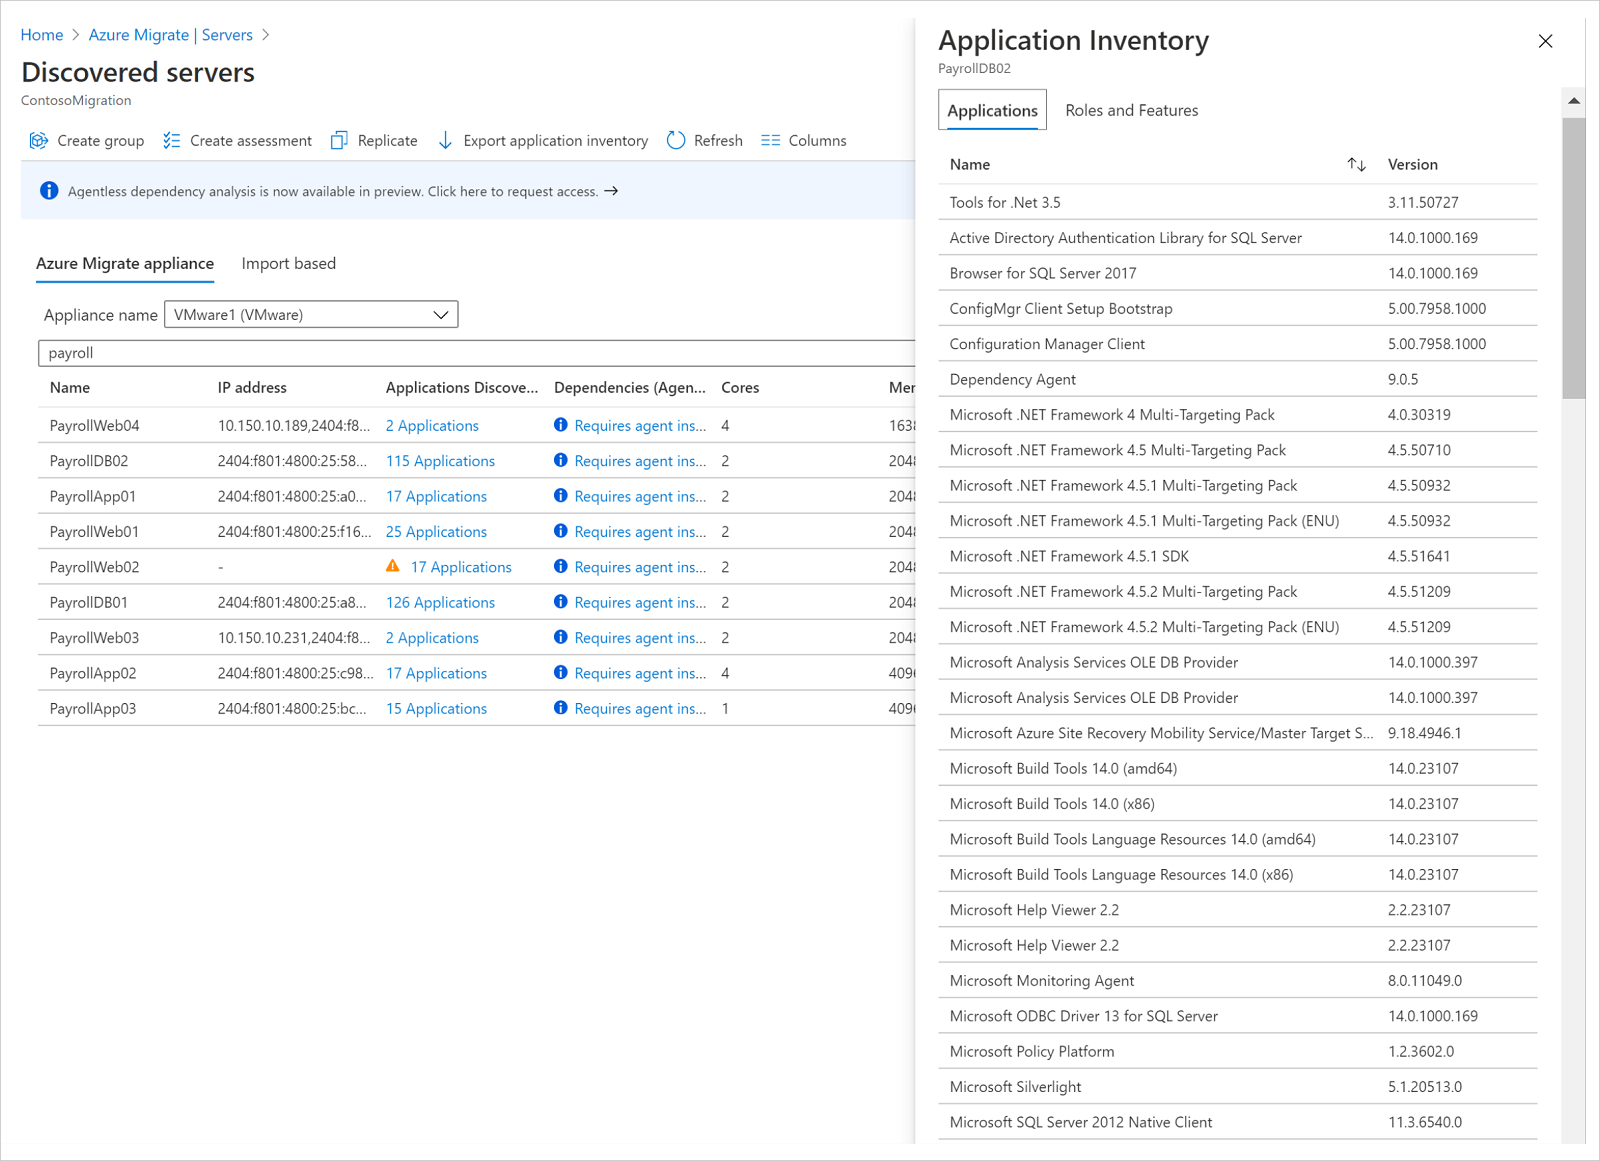 Screenshot that shows the application inventory on the portal.